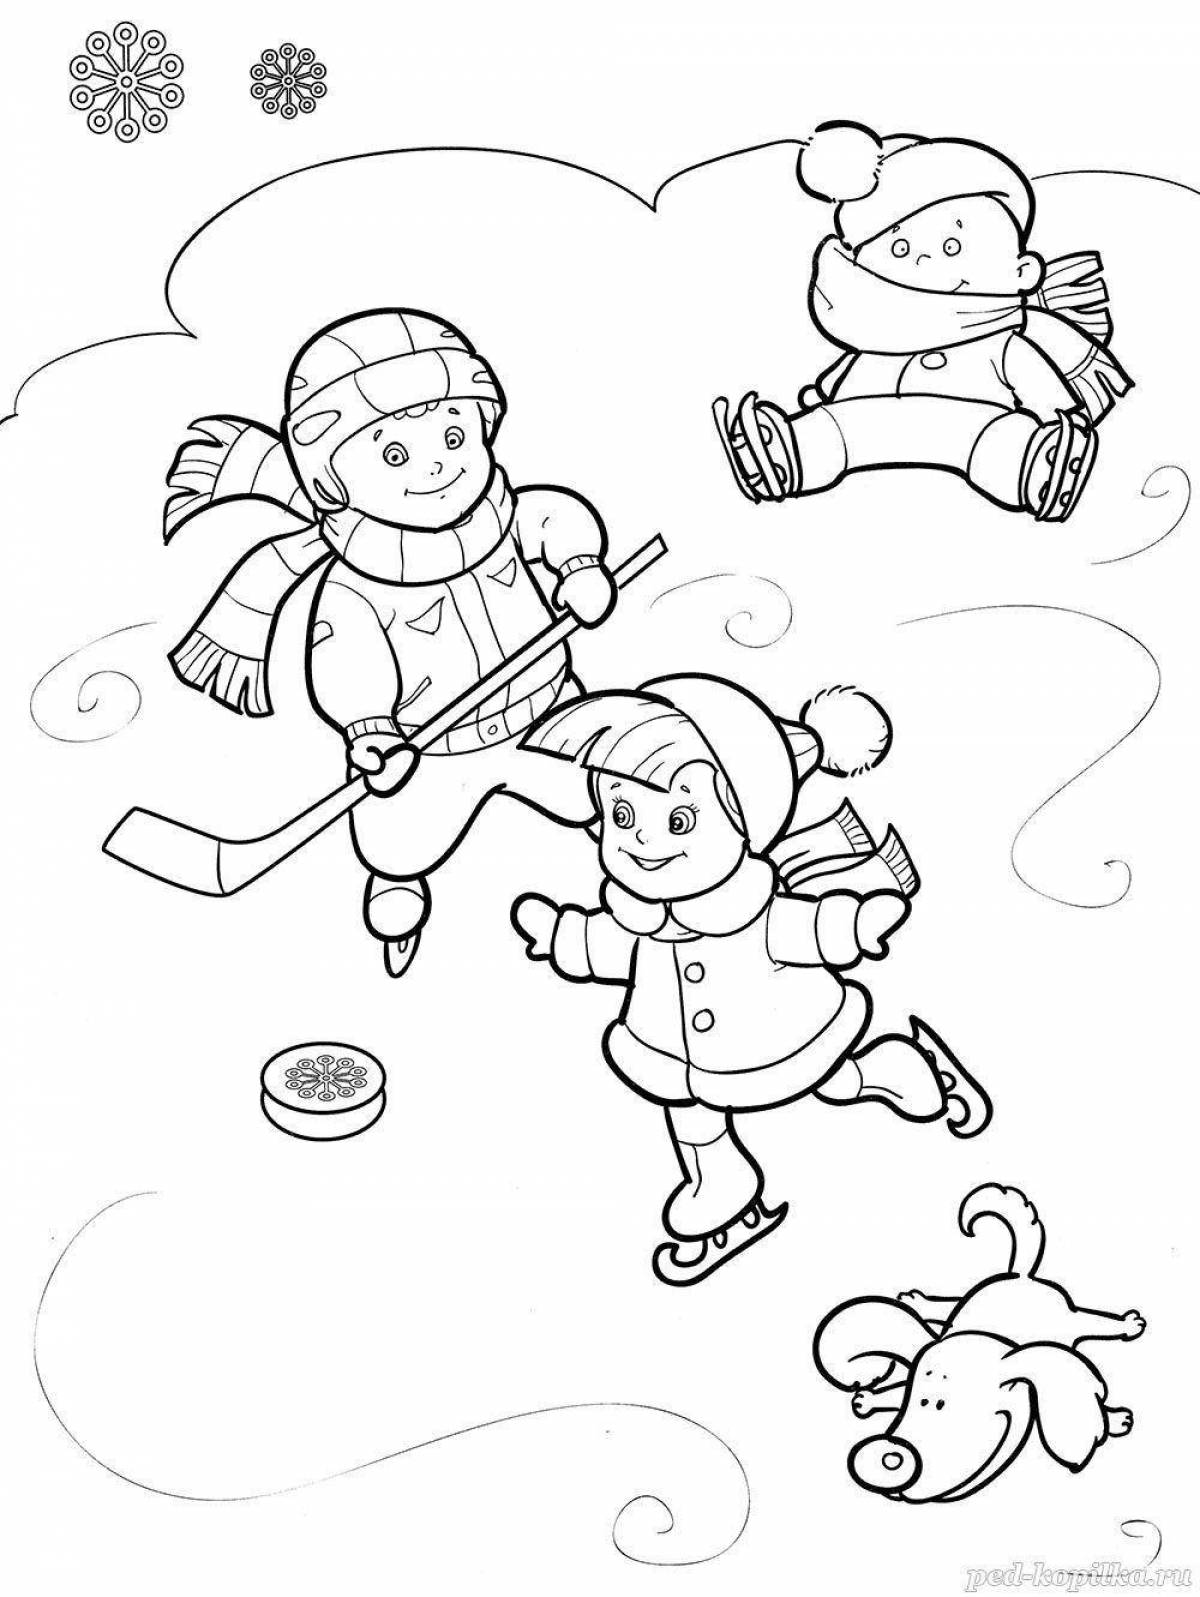 Colorful winter sports coloring page